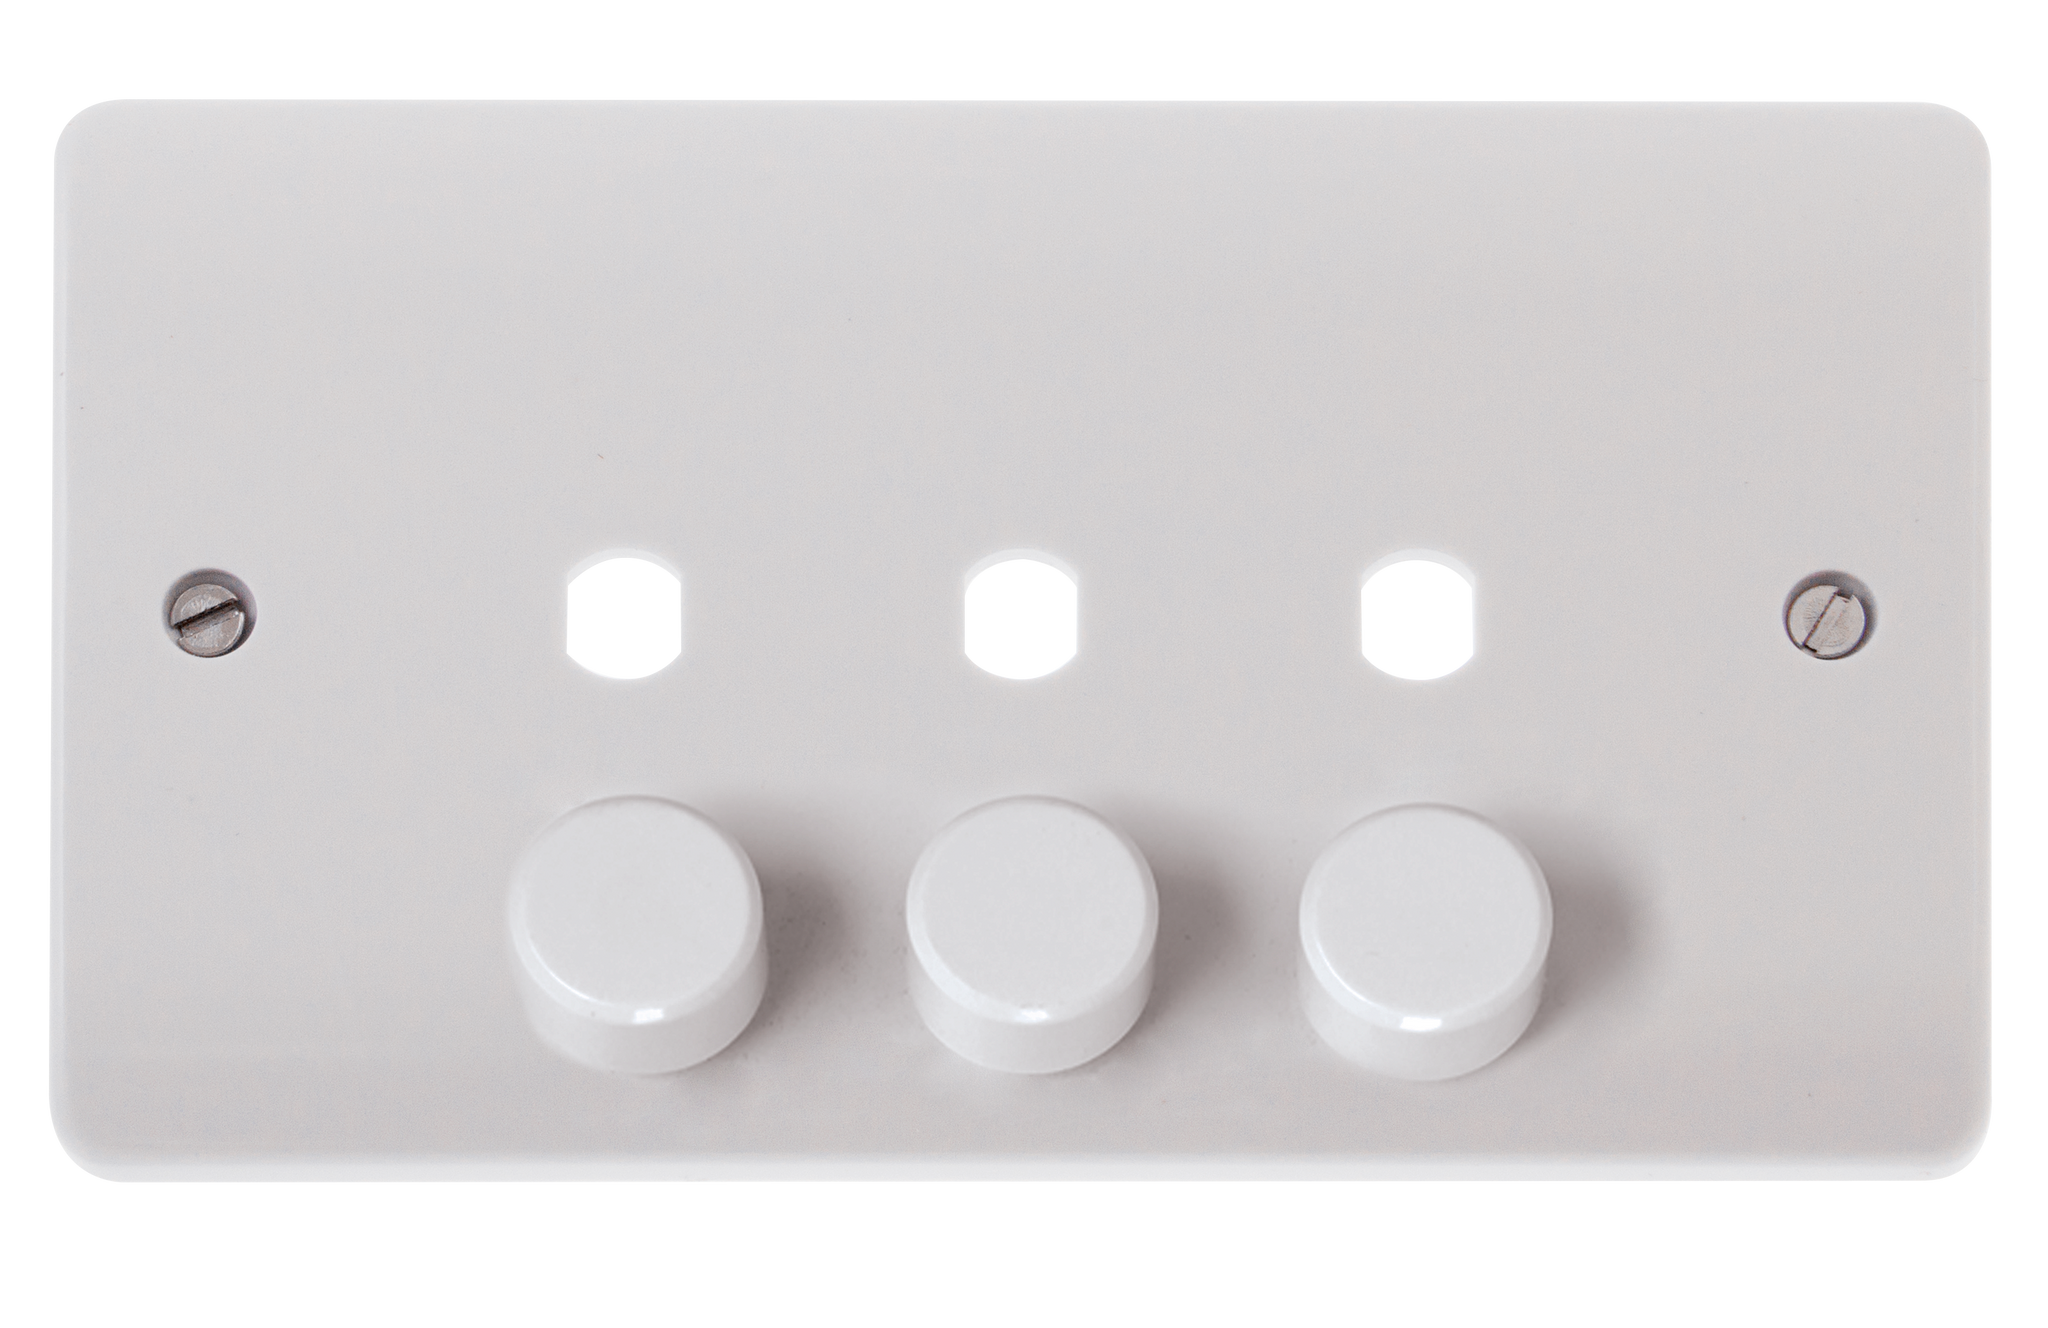 CLICK MODE MODE 3 GANG DOUBLE DIMMER PLATE & KNOBS